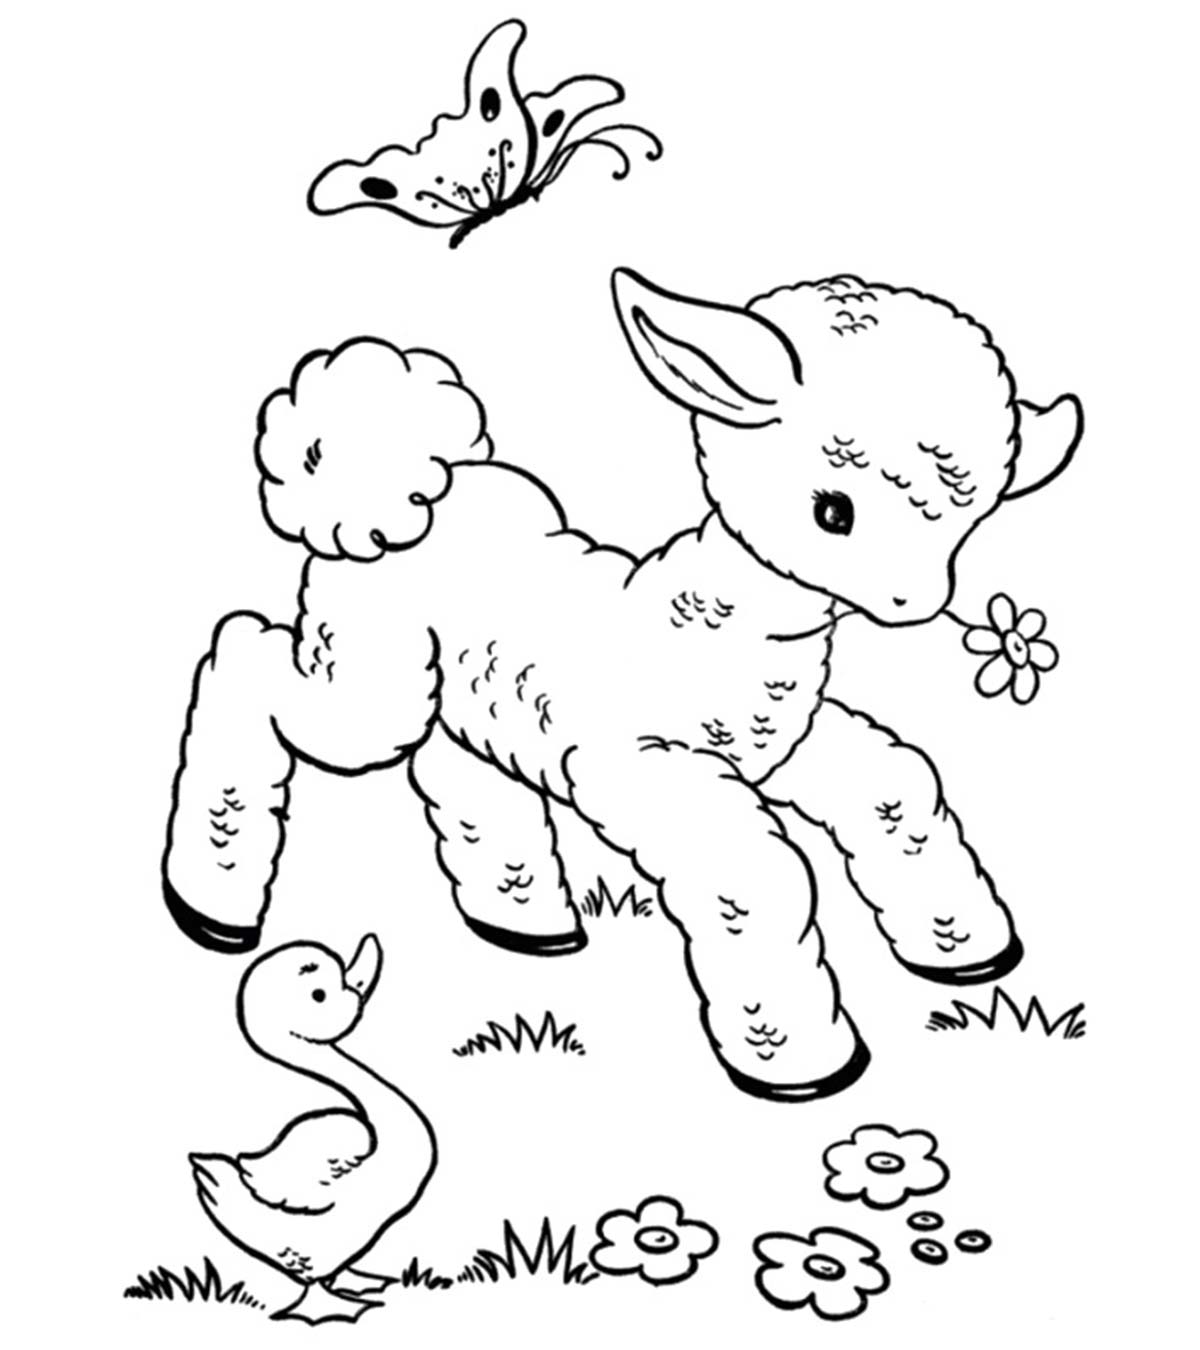 25 Funny Sheep Coloring Pages Your Toddler Will Love_image